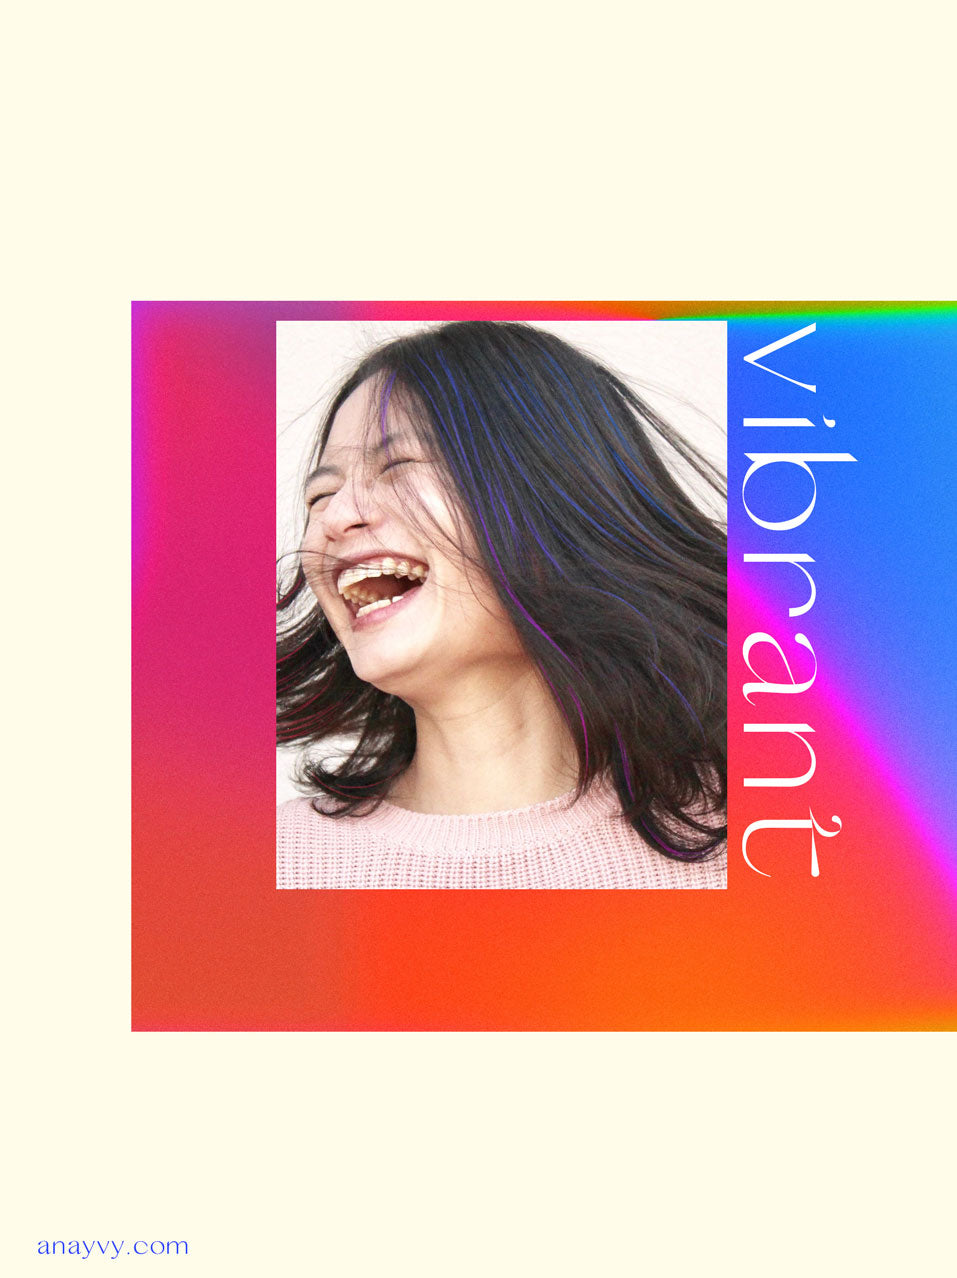 Animated Gradients | Grain Texture & Vivid Color - ANA & YVY